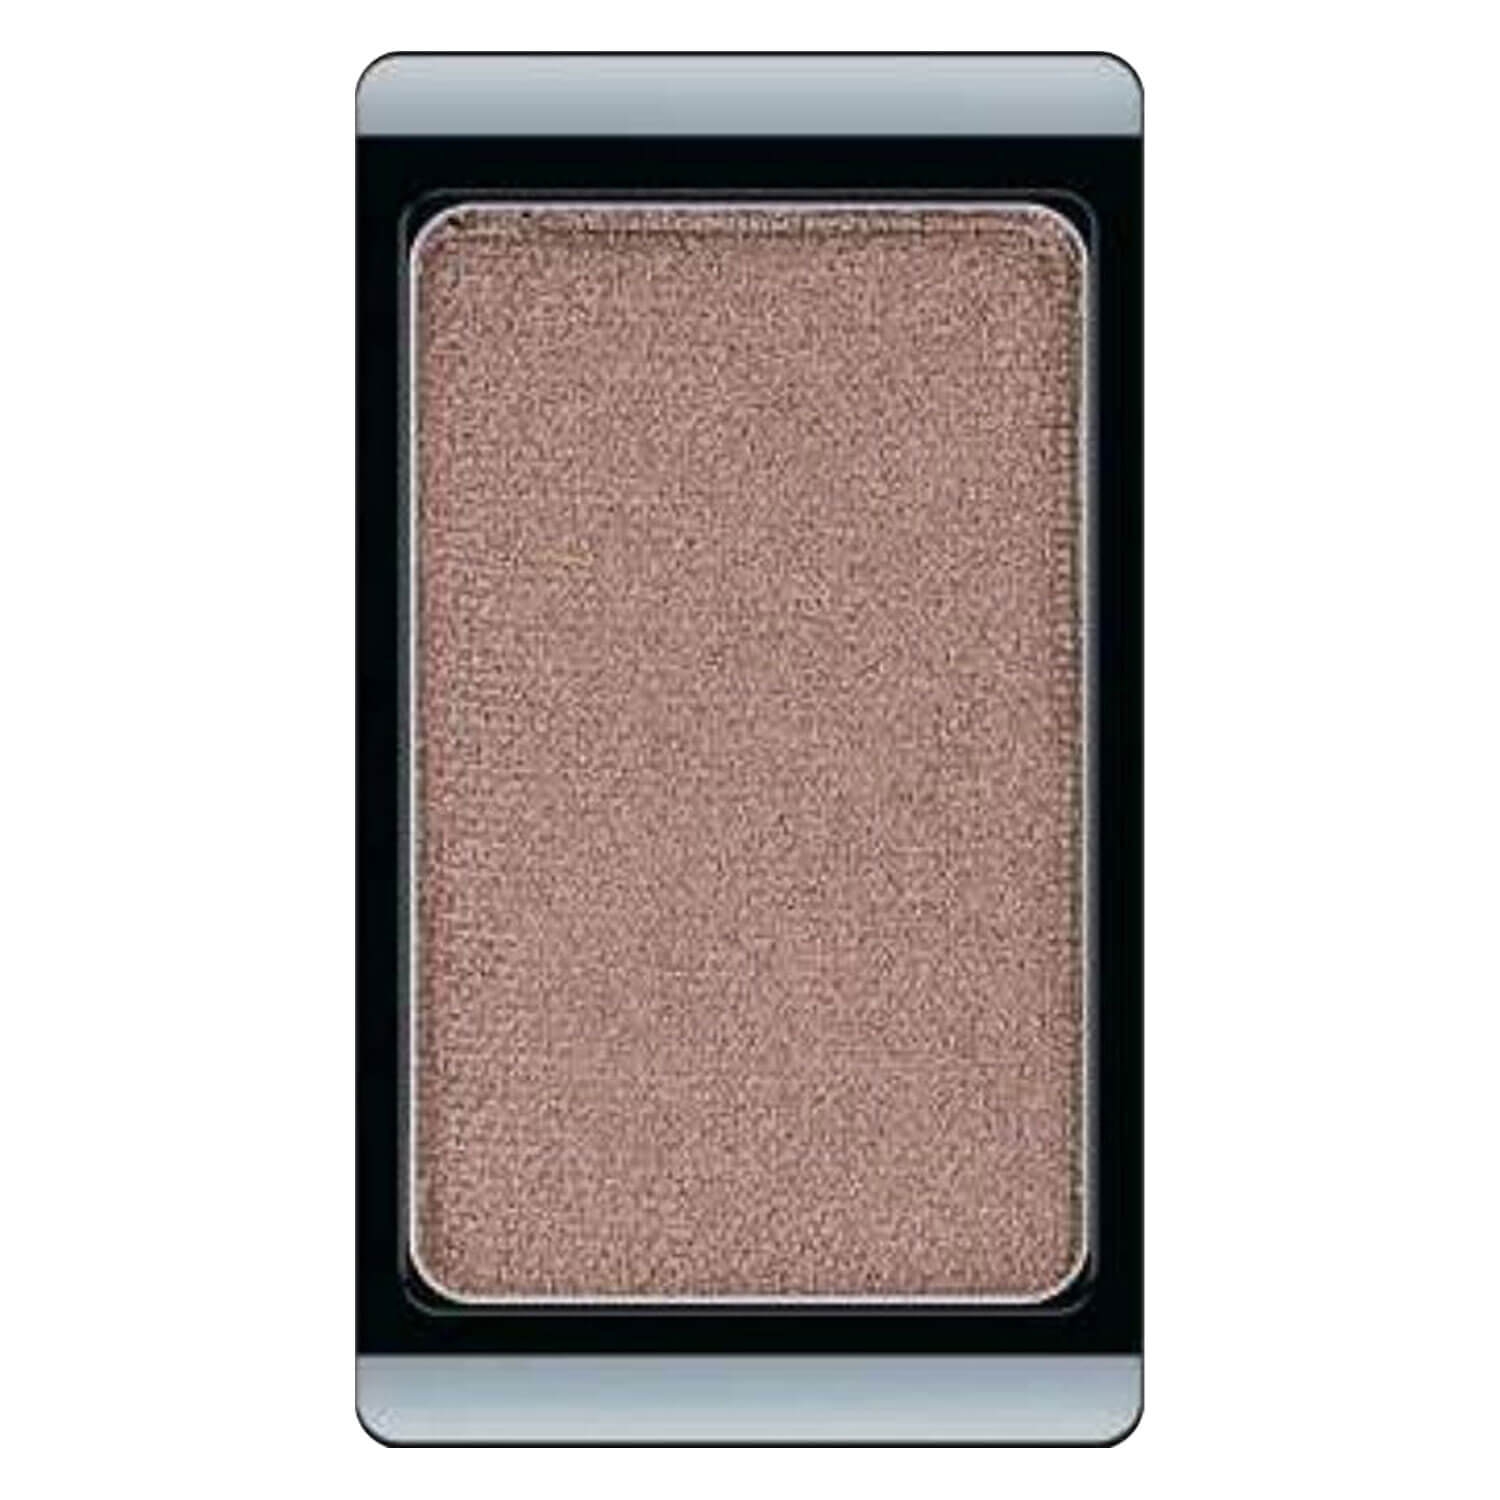 Product image from Eyeshadow Duochrome - Elegant Brown 208